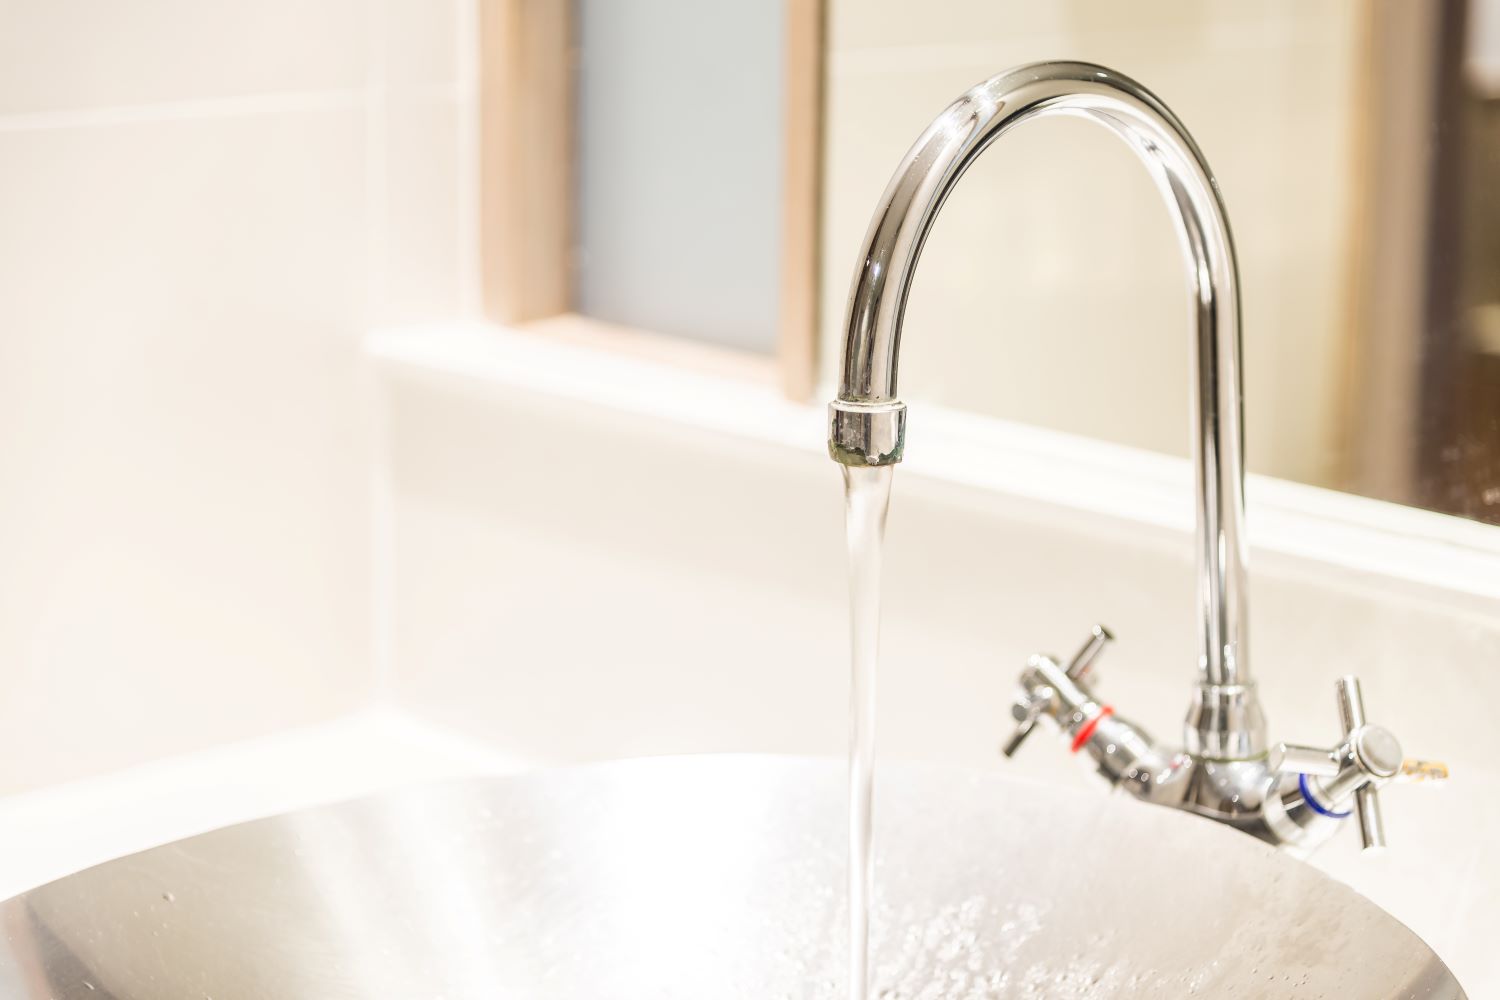 Why Your Home Has Low Water Pressure